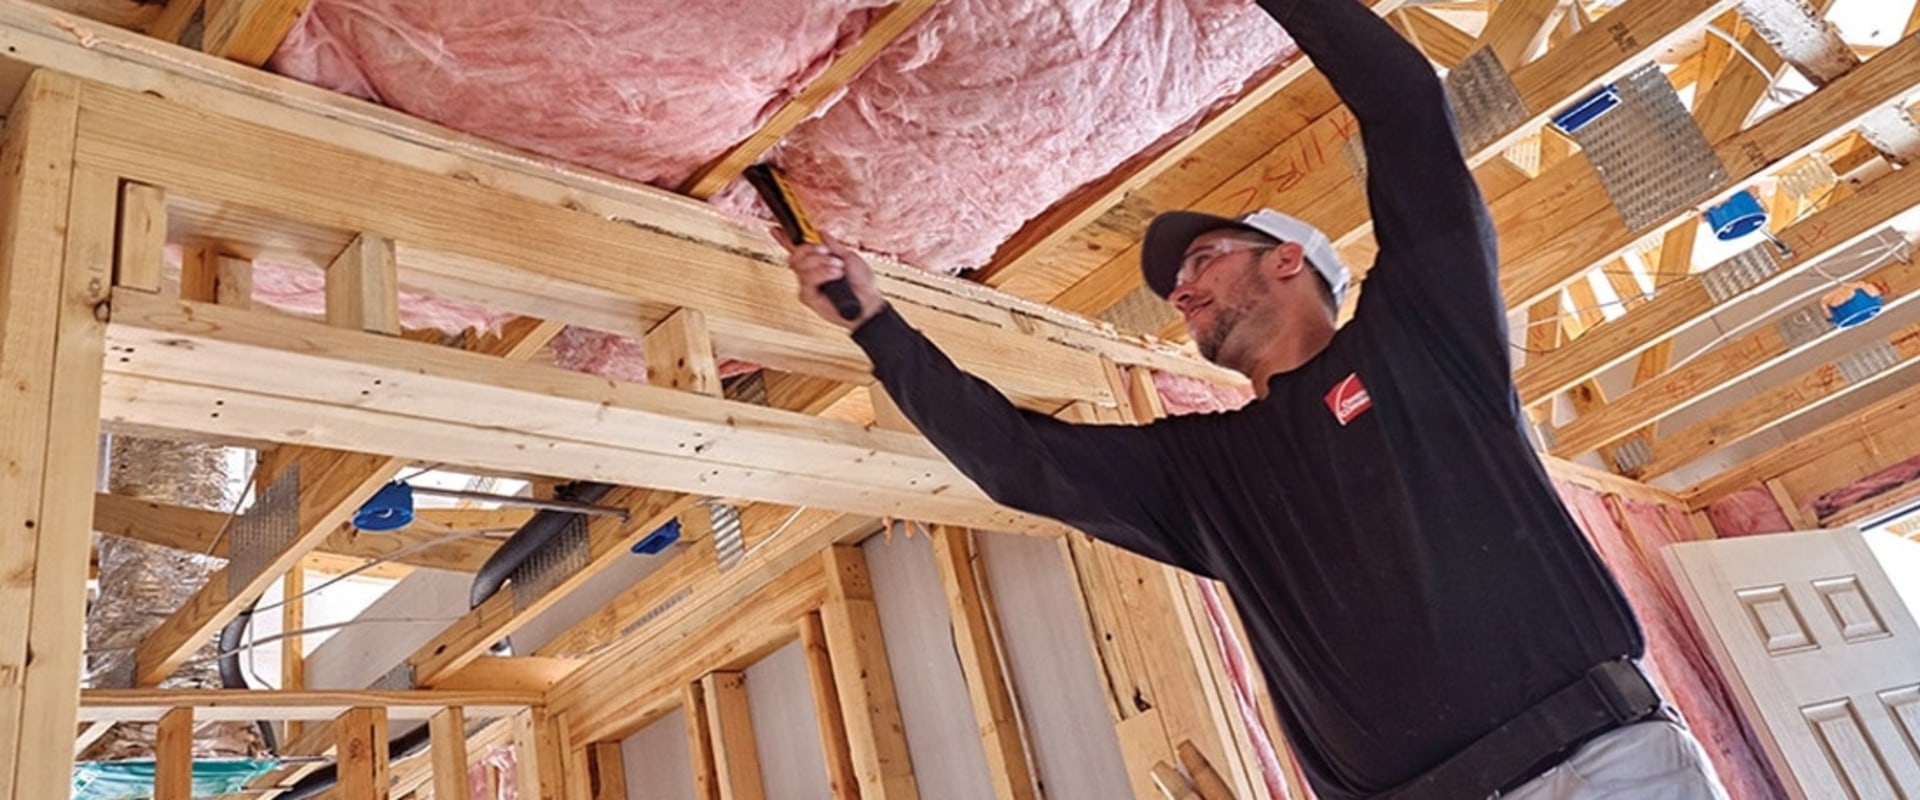 Should You Replace or Add New Attic Insulation?